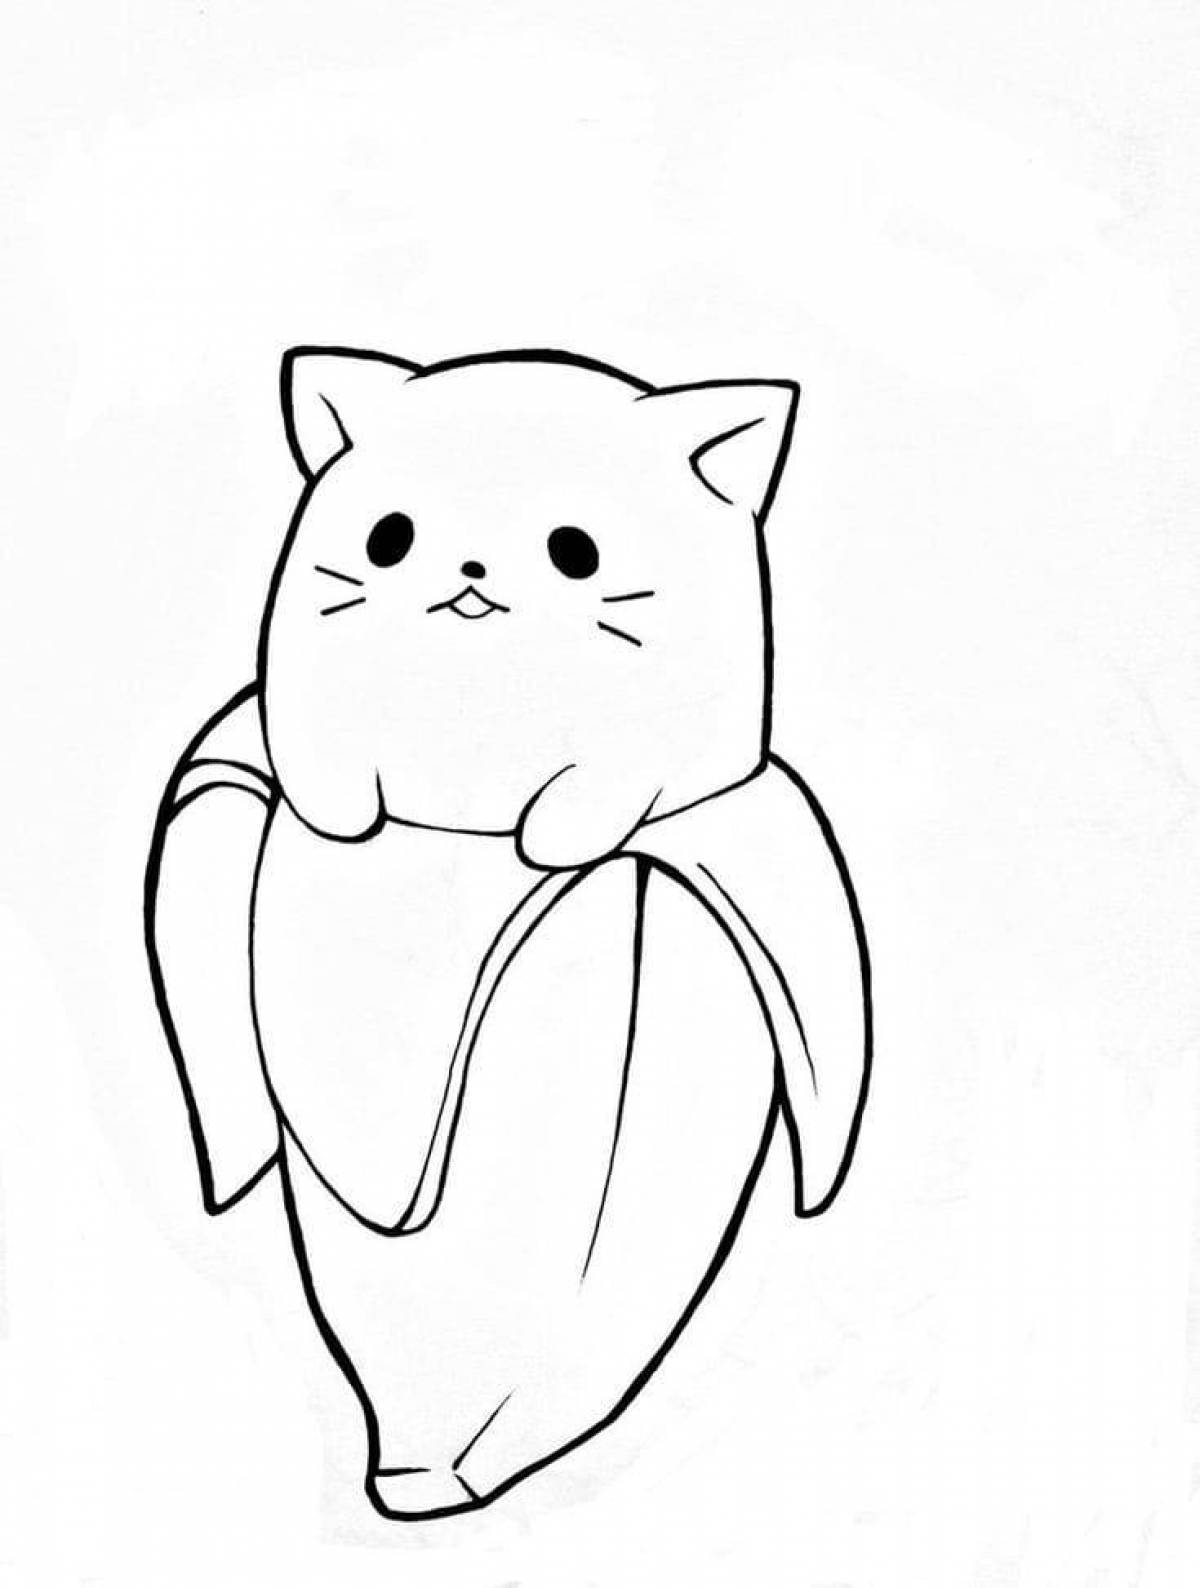 Great drawings coloring pages